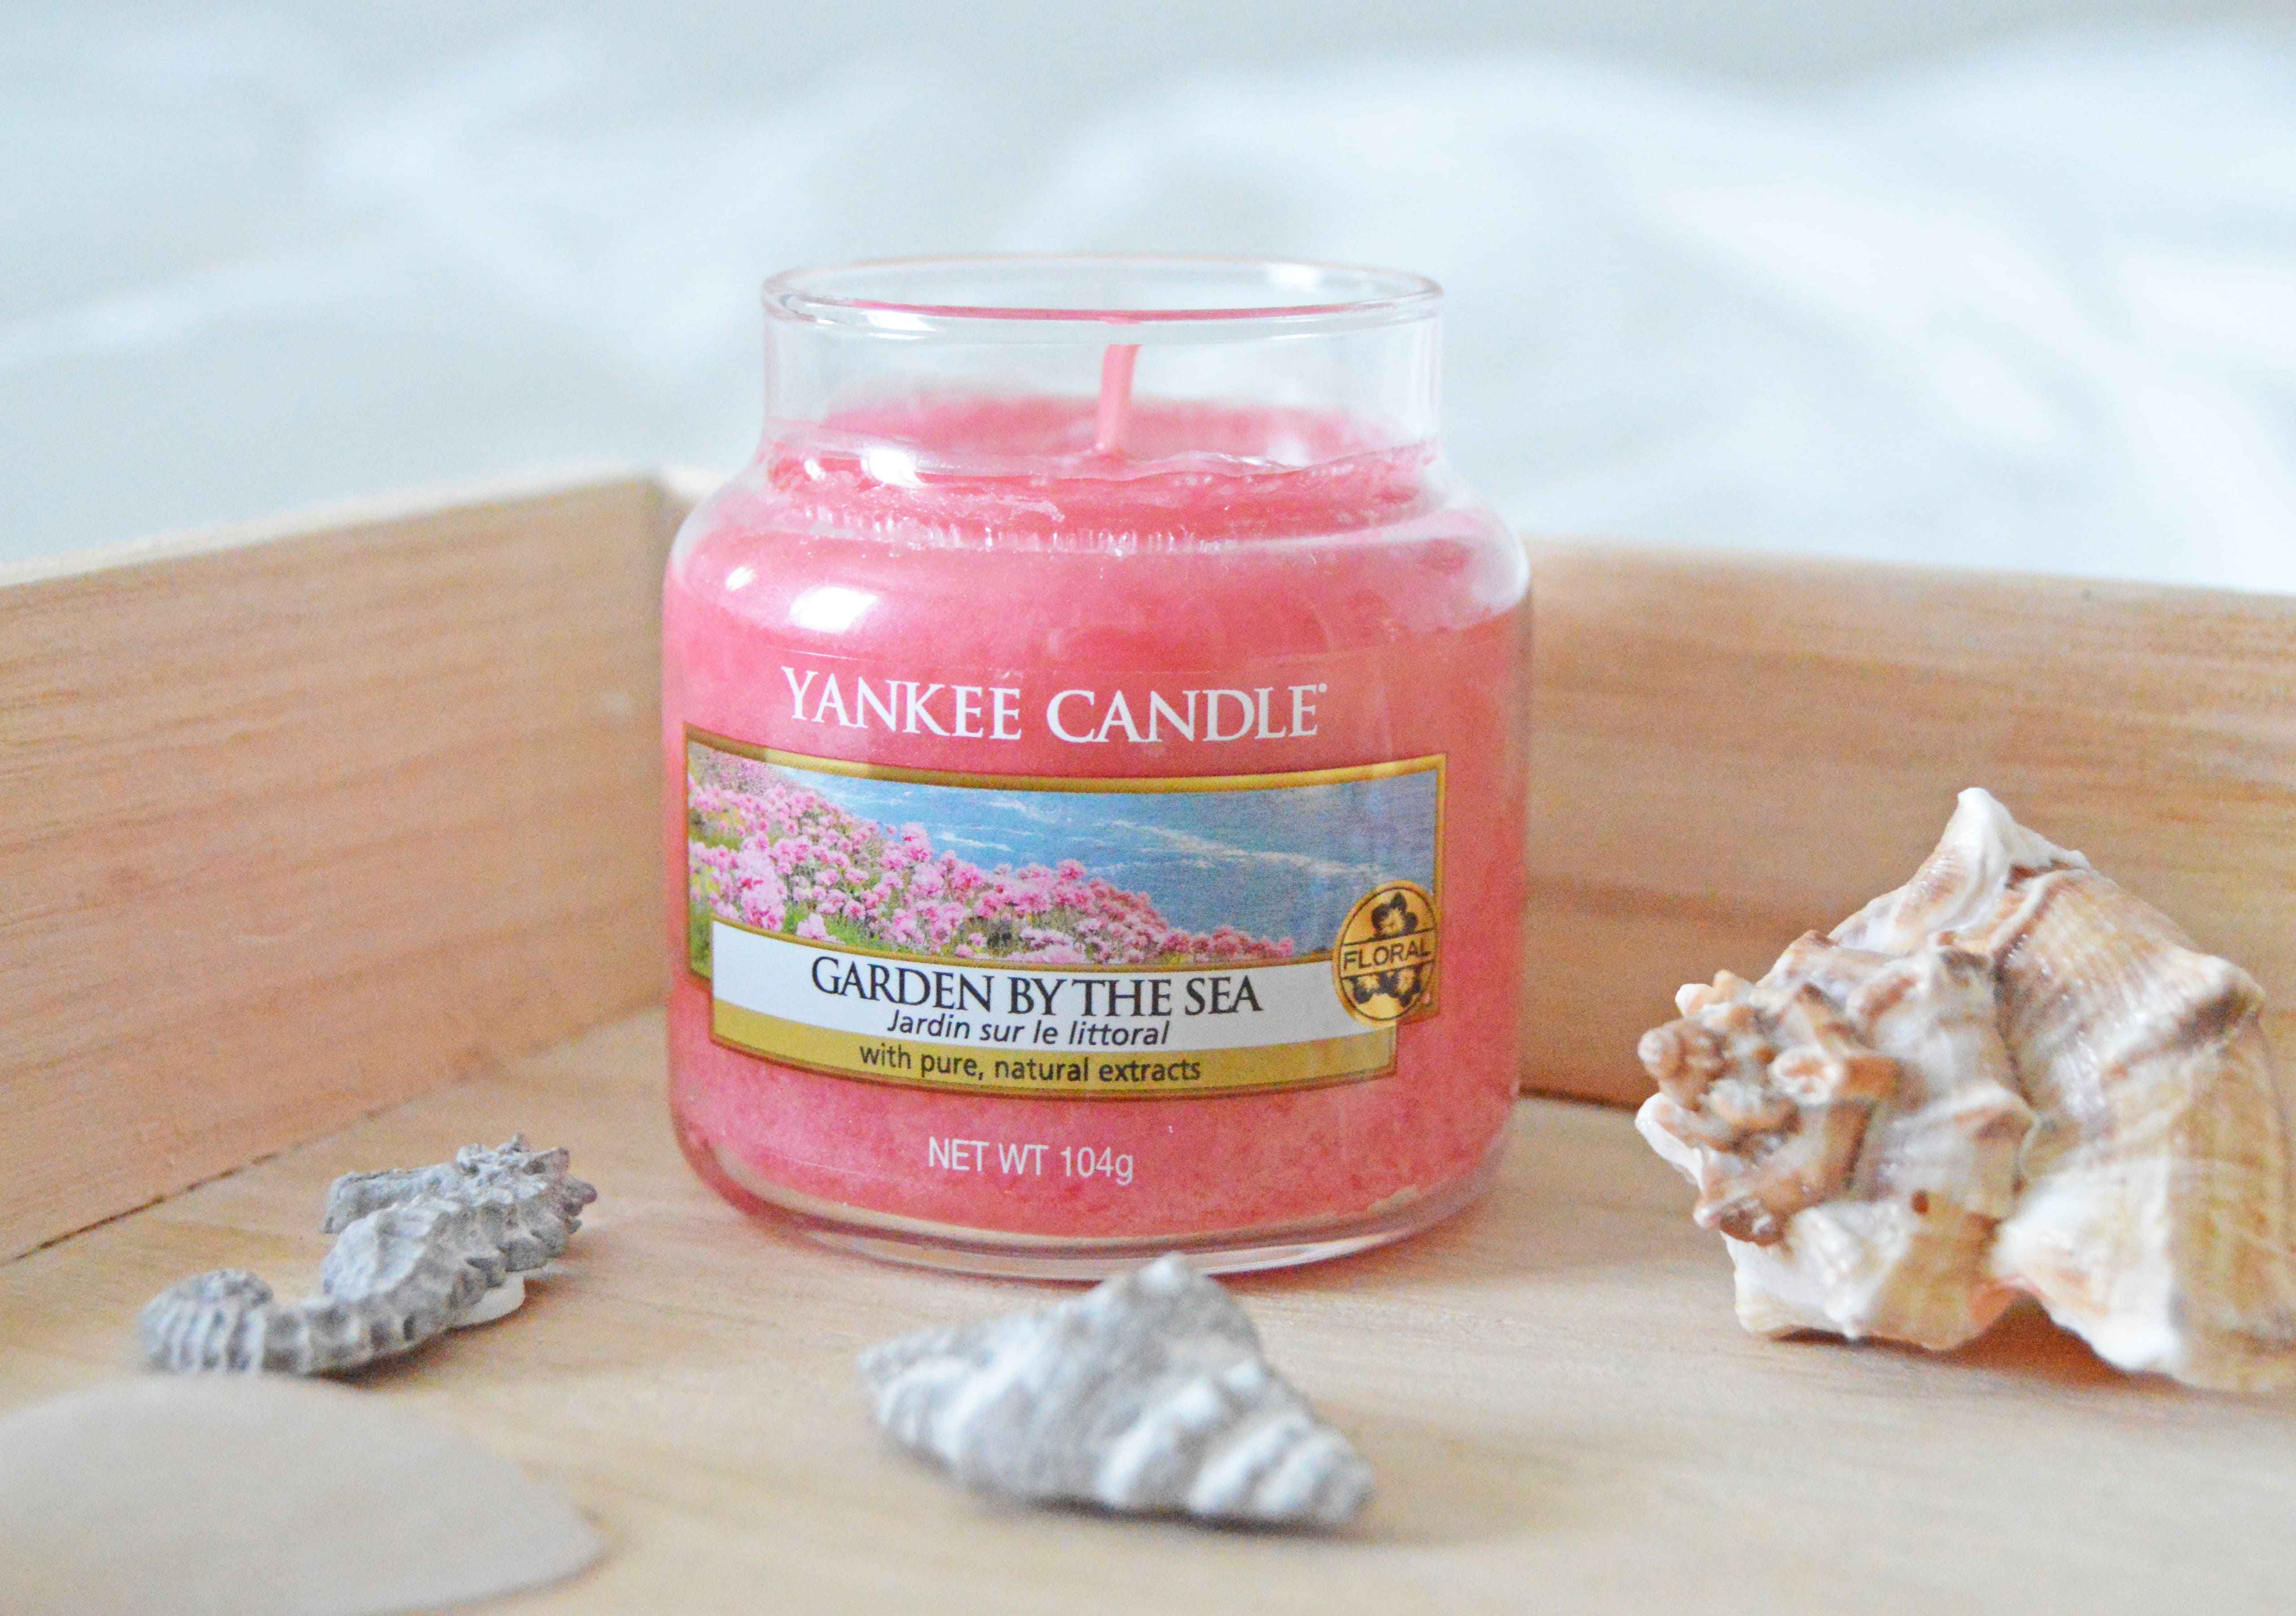 Yankee Candle - Garden by the Sea